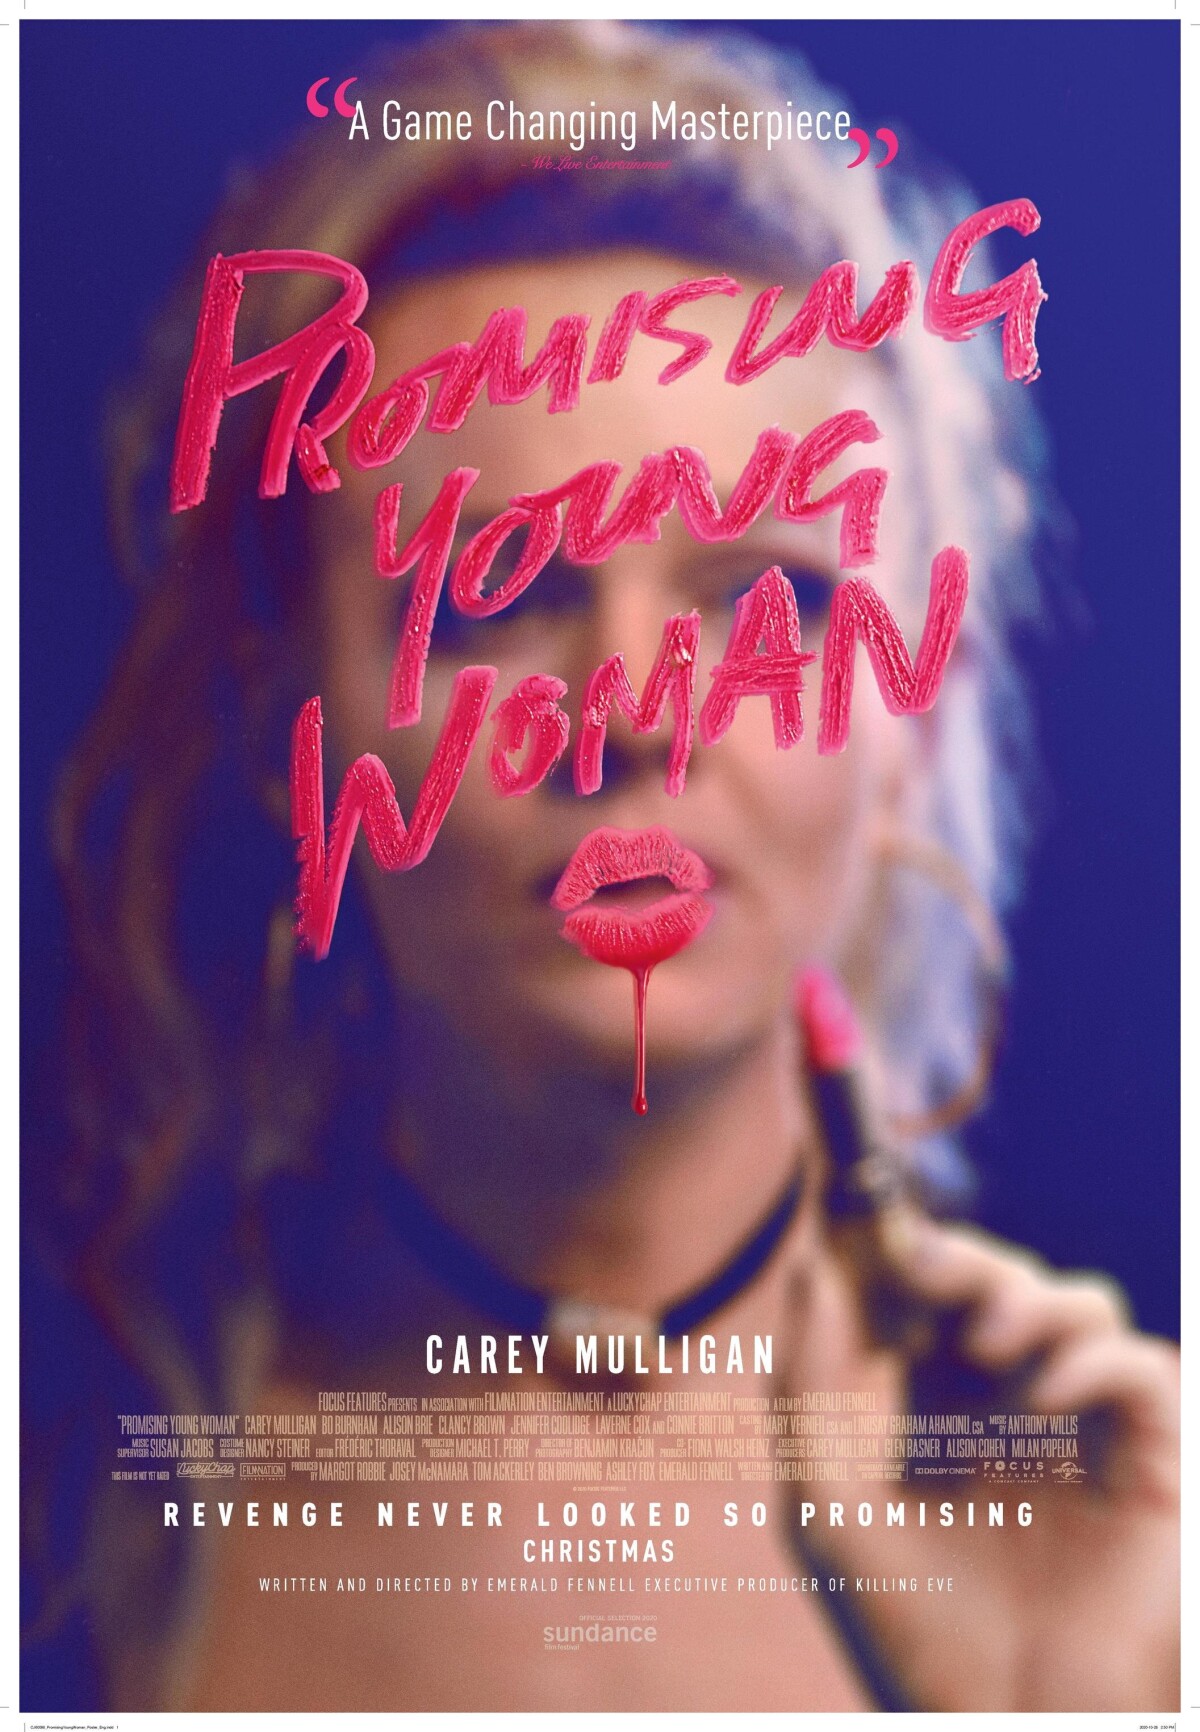 promising-young-woman-poster